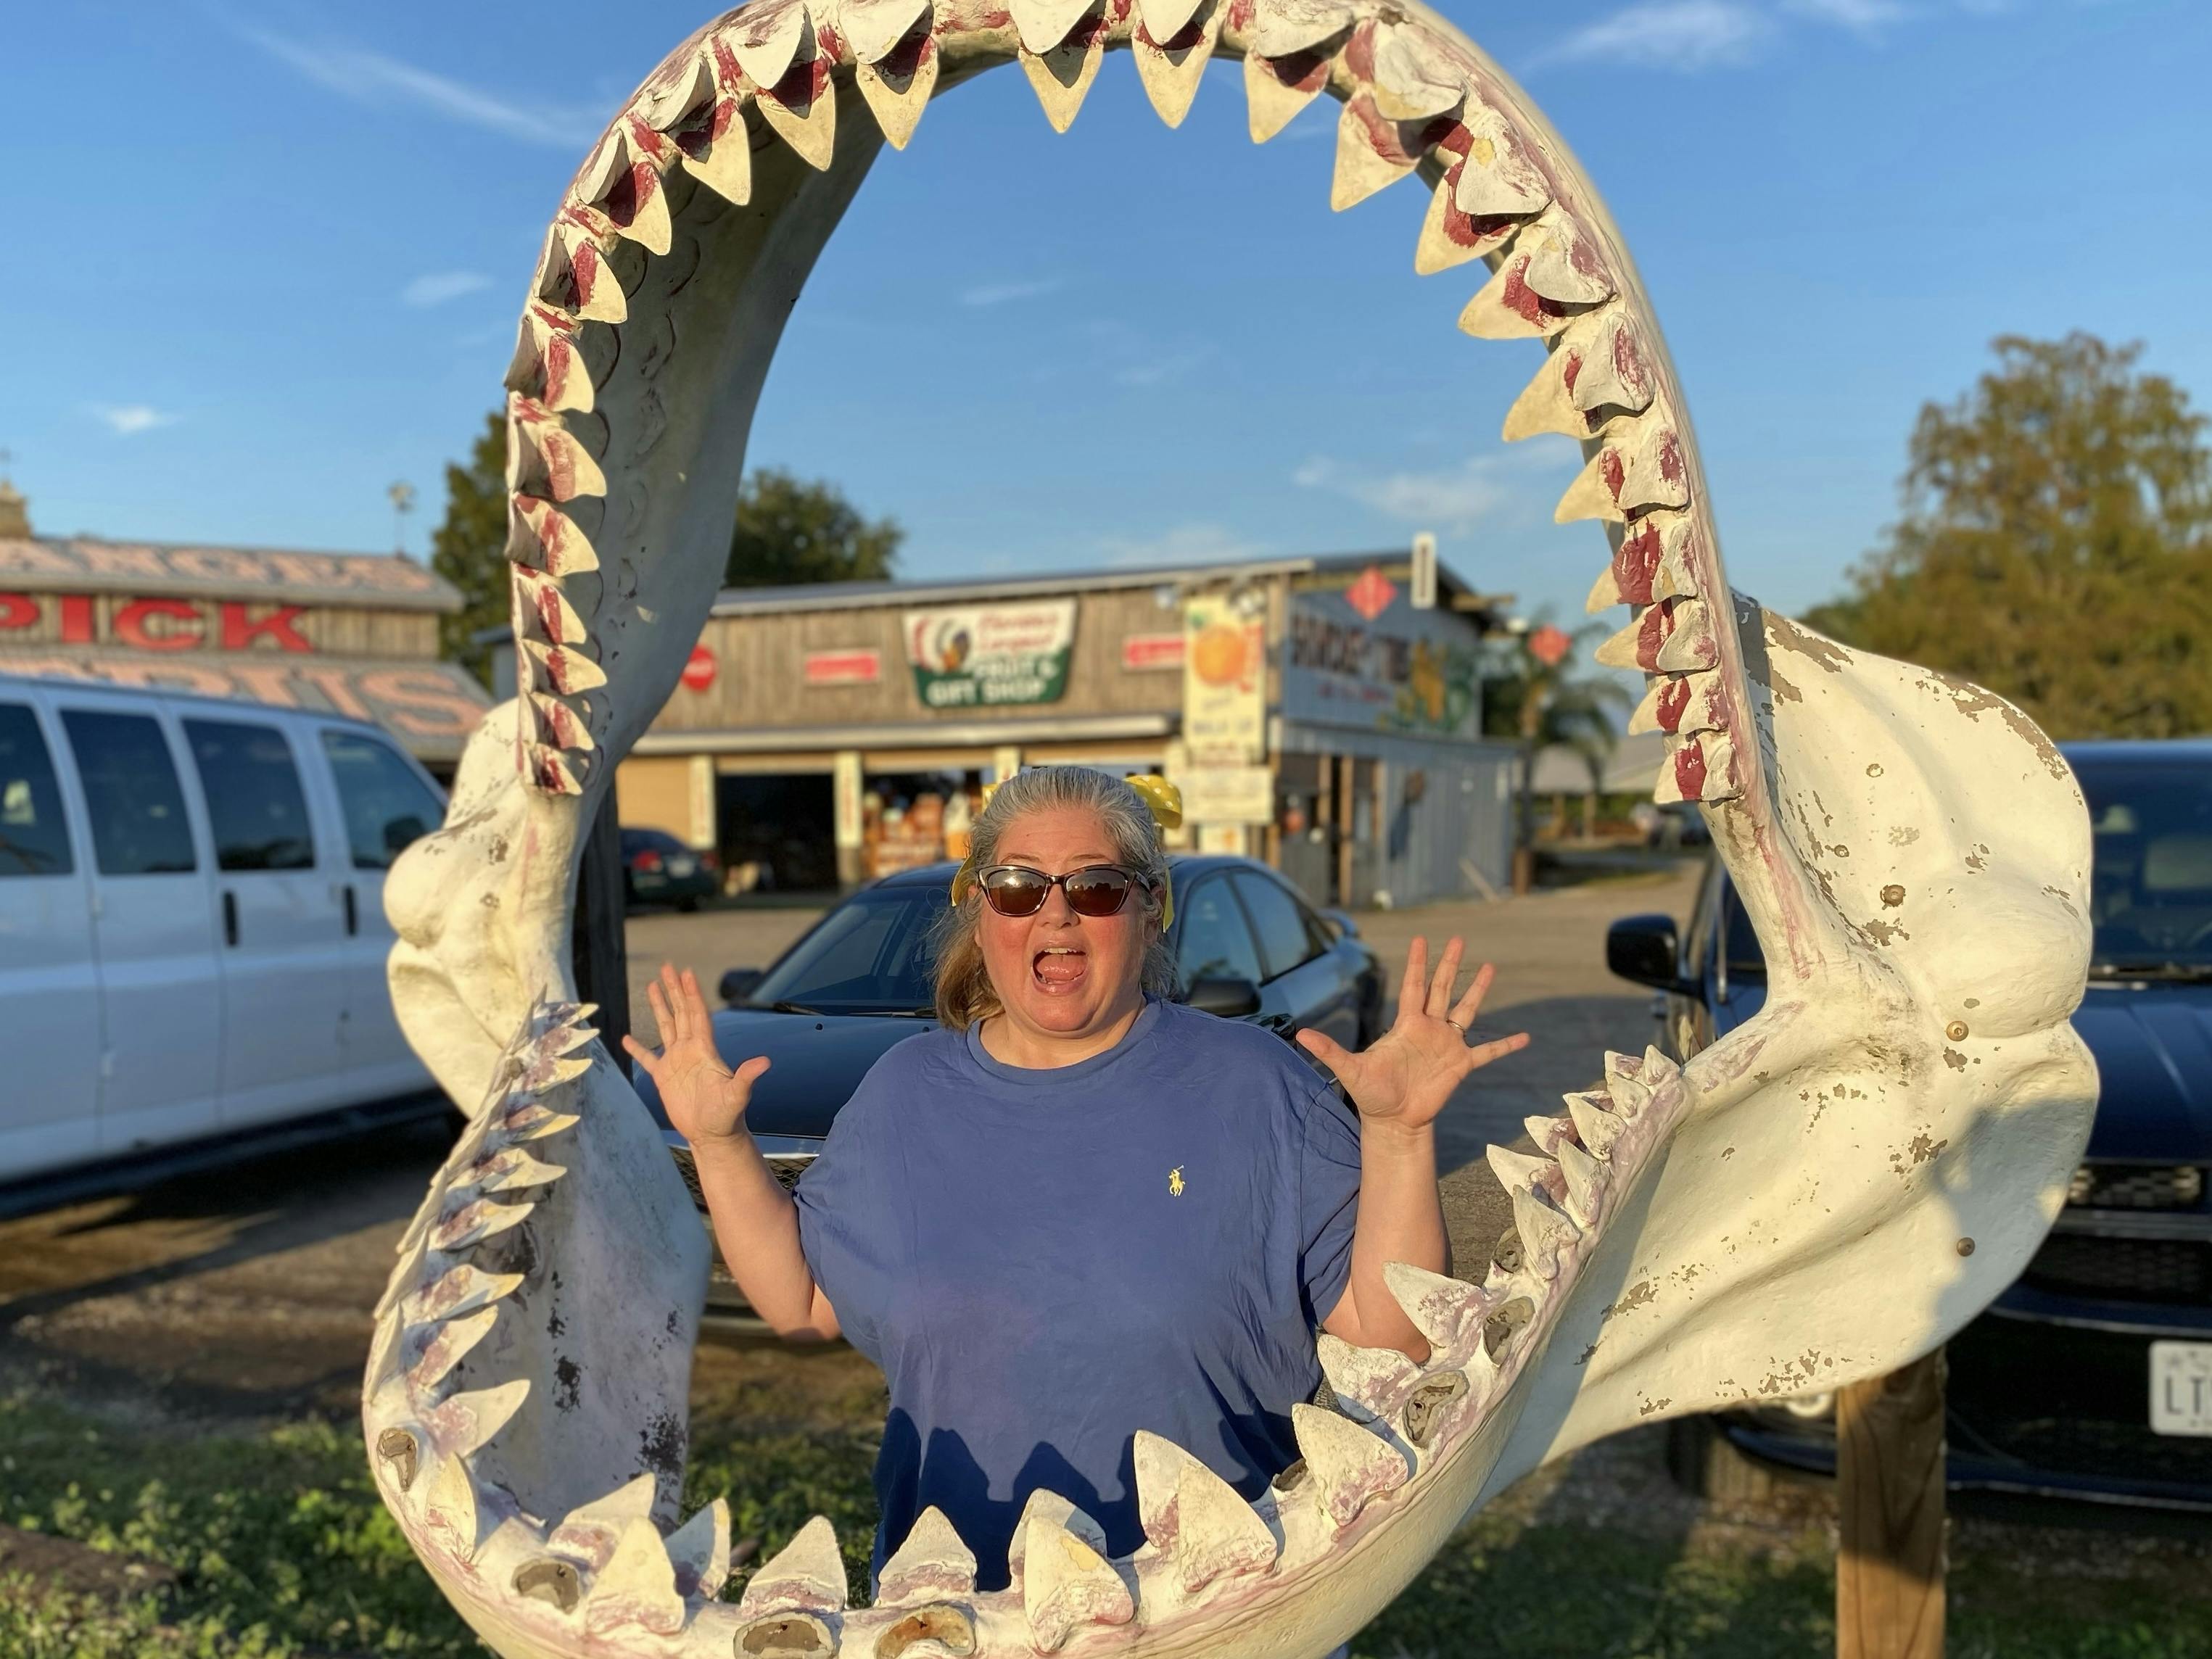 Tiffany Dunagan inside the jaws of a shark replica at a roadside attraction